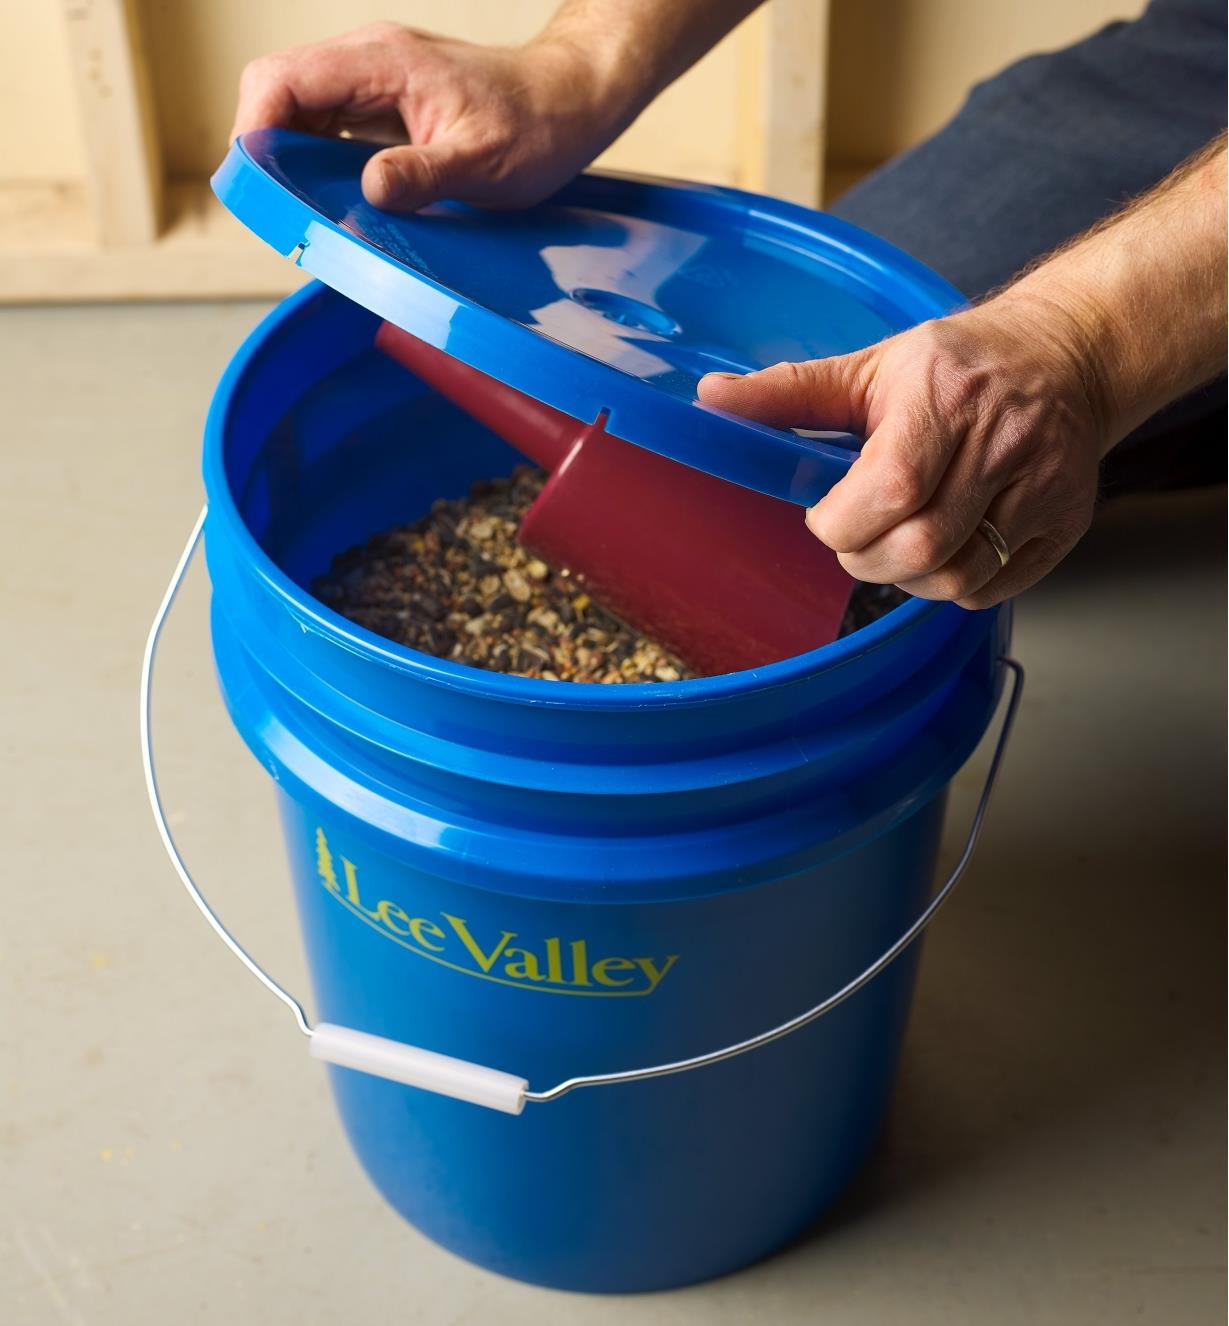 Opening the lid of a 19 Litre Lee Valley Pail filled with birdseed